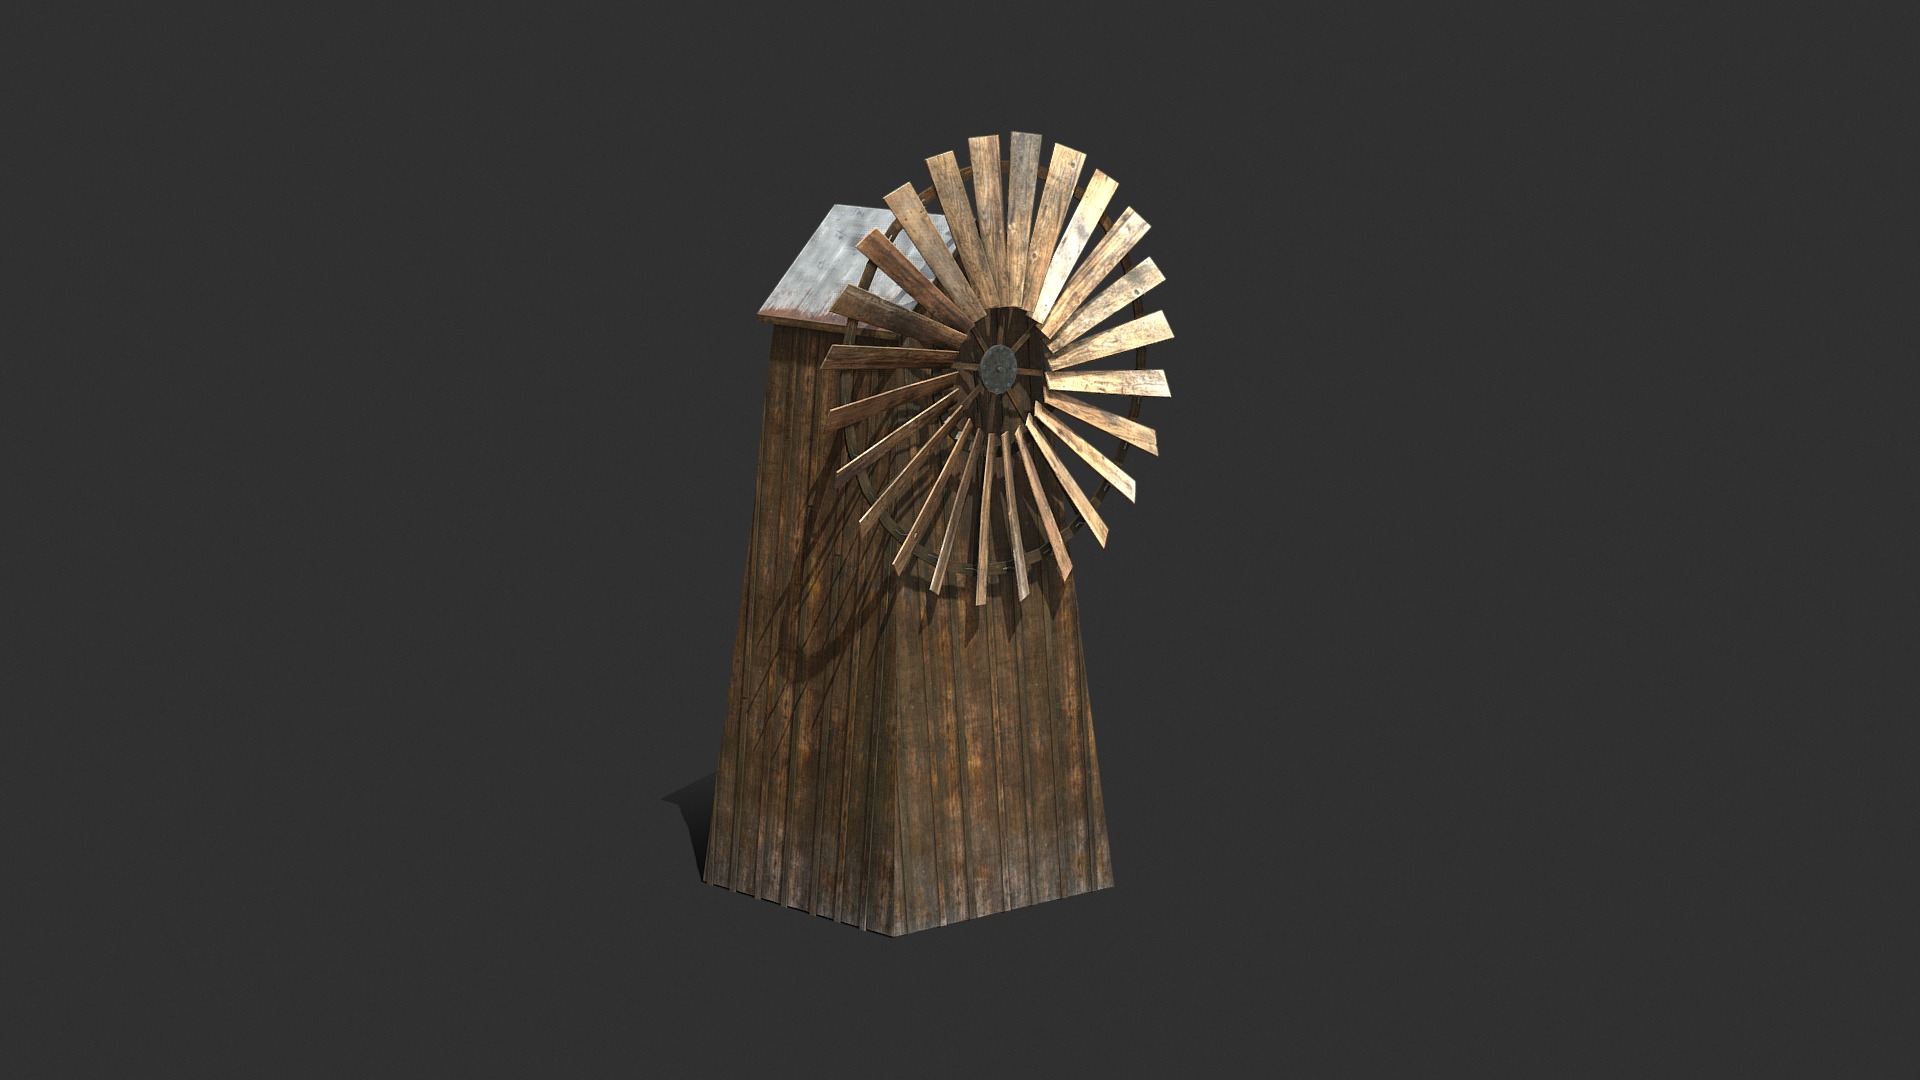 3D model Windmill – Slav Architecture - This is a 3D model of the Windmill - Slav Architecture. The 3D model is about a wood carving of a head.